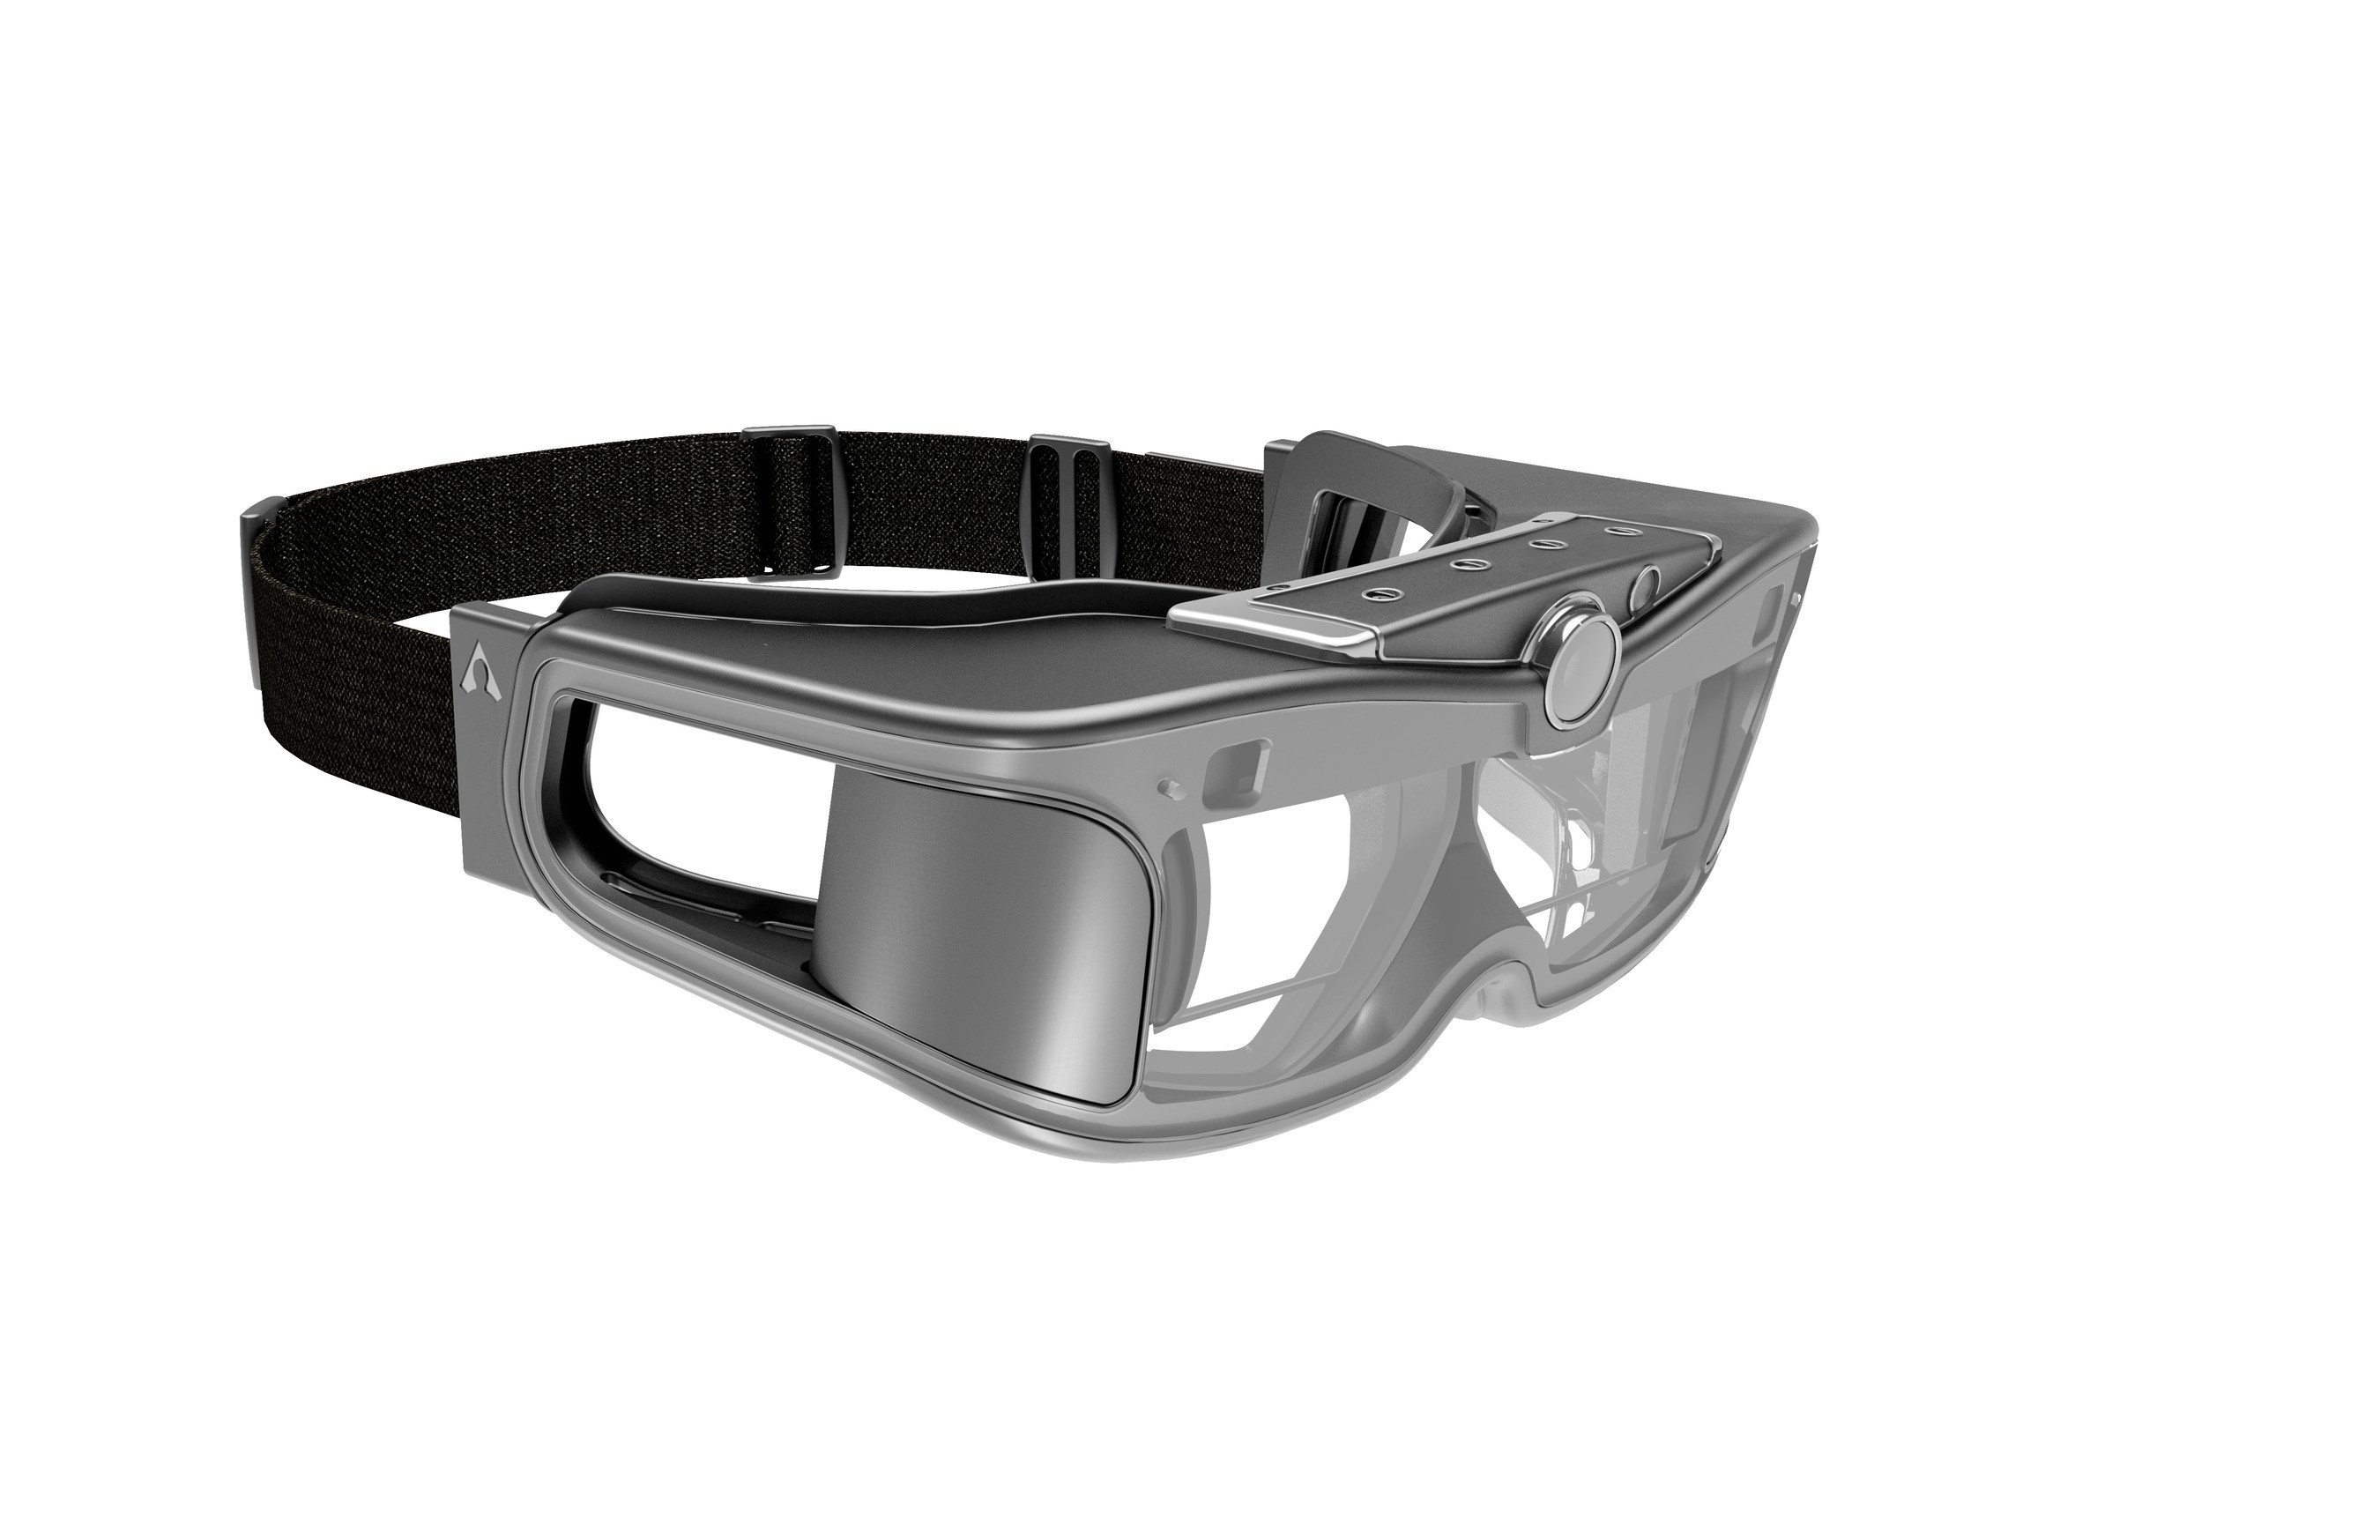 Atheer AiR(TM), the world's most interactive 3D smart glasses platform for deskless professionals.